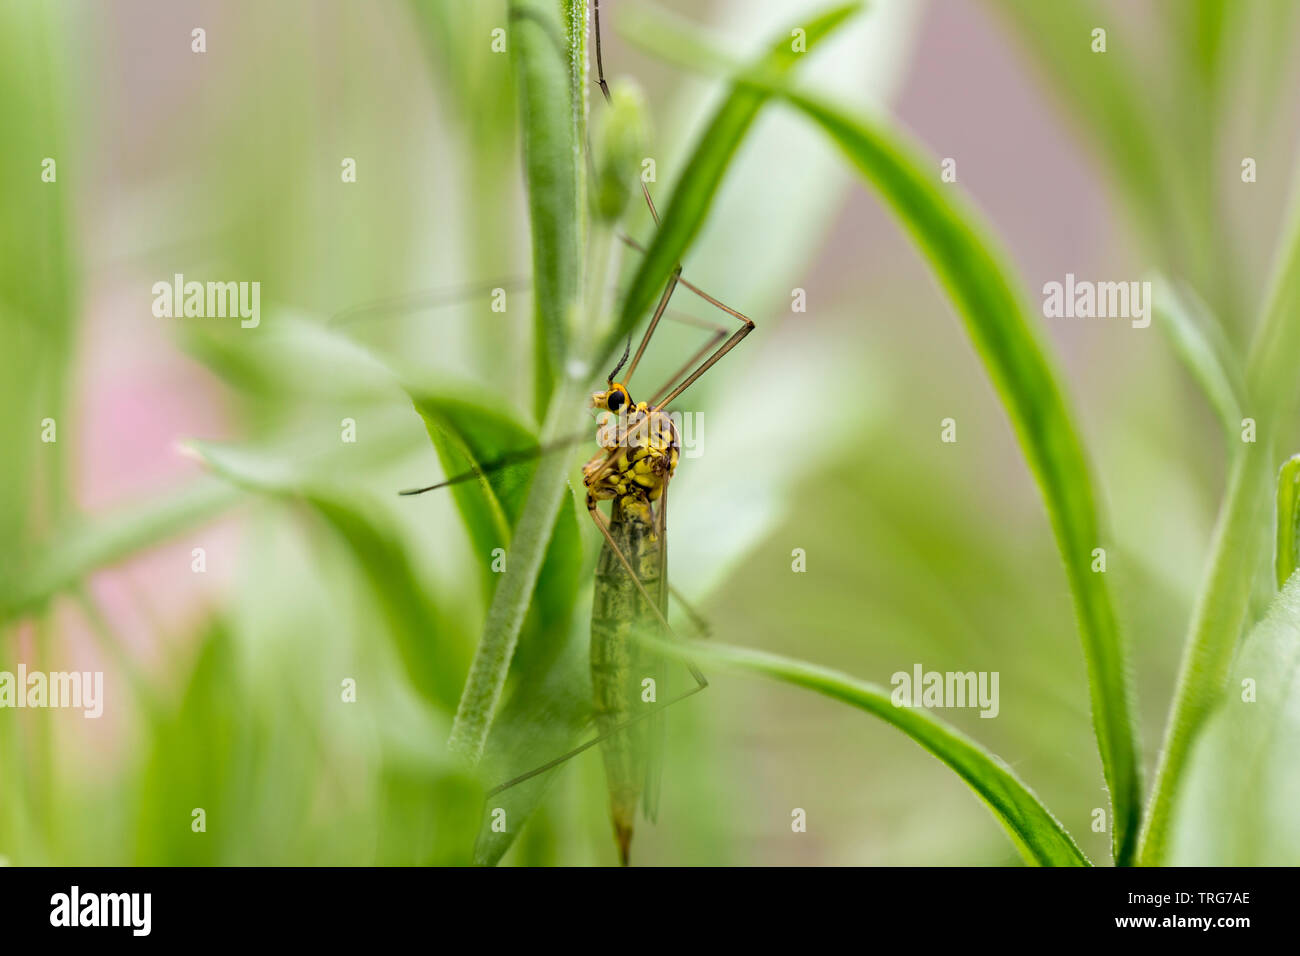 Insect crane fly macro/close-up sitting on a lavender plant Stock Photo